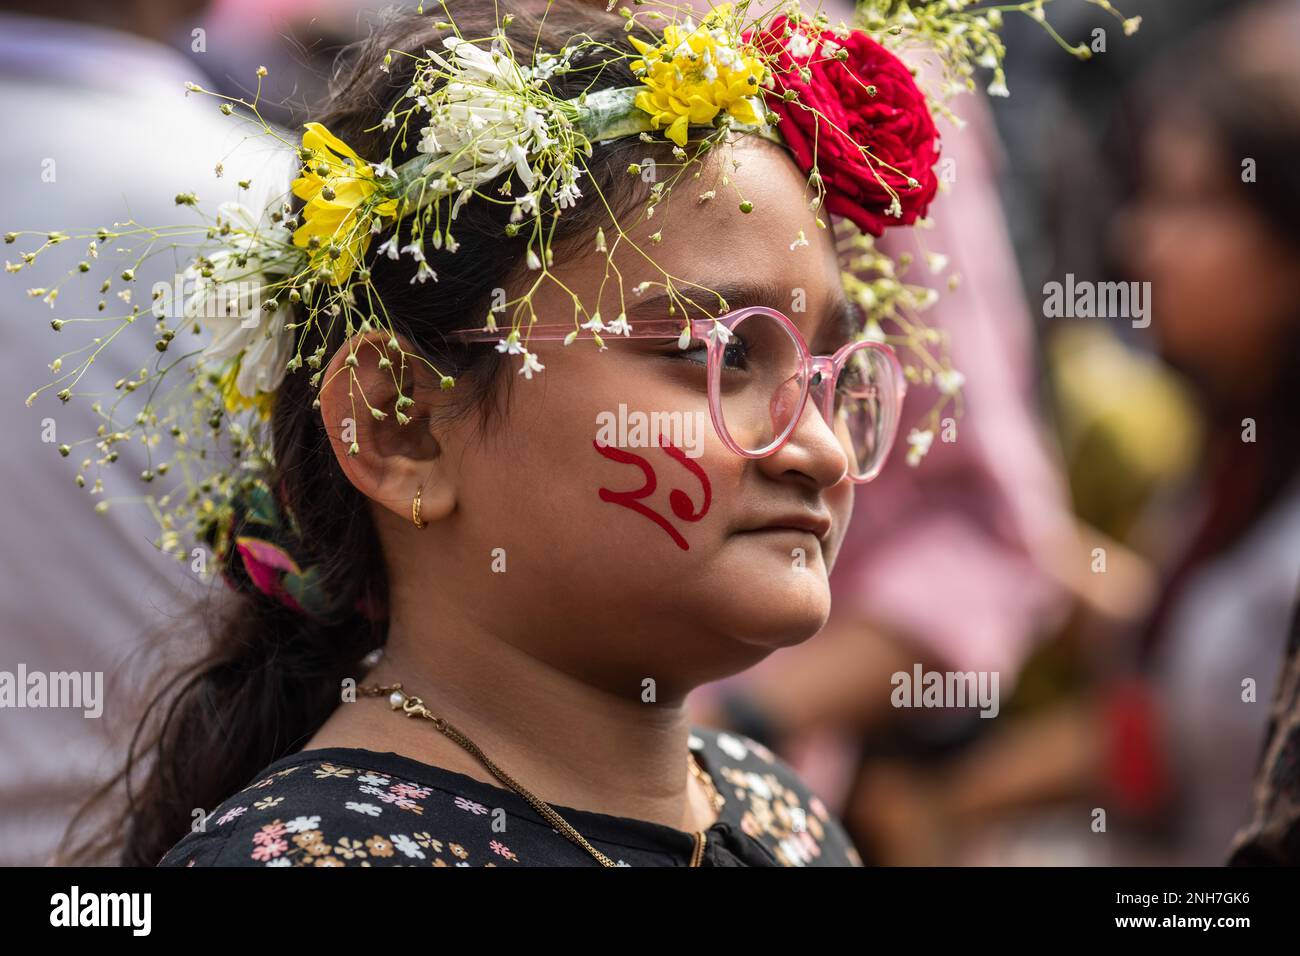 A kid seen with paint on her face and flowers on the head at the Martyr's Monument, or Shaheed Minar during the International Mother Language Day in Dhaka. Bangladeshis pay tribute at the Martyr's Monument, or Shaheed Minar, on International Mother Language Day in Dhaka, International Mother Language Day is observed in commemoration of the movement where a number of students died in 1952, defending the recognition of Bangla as a state language of the former East Pakistan, now Bangladesh. (Photo by Sazzad Hossain/SOPA Images/Sipa USA) Stock Photo